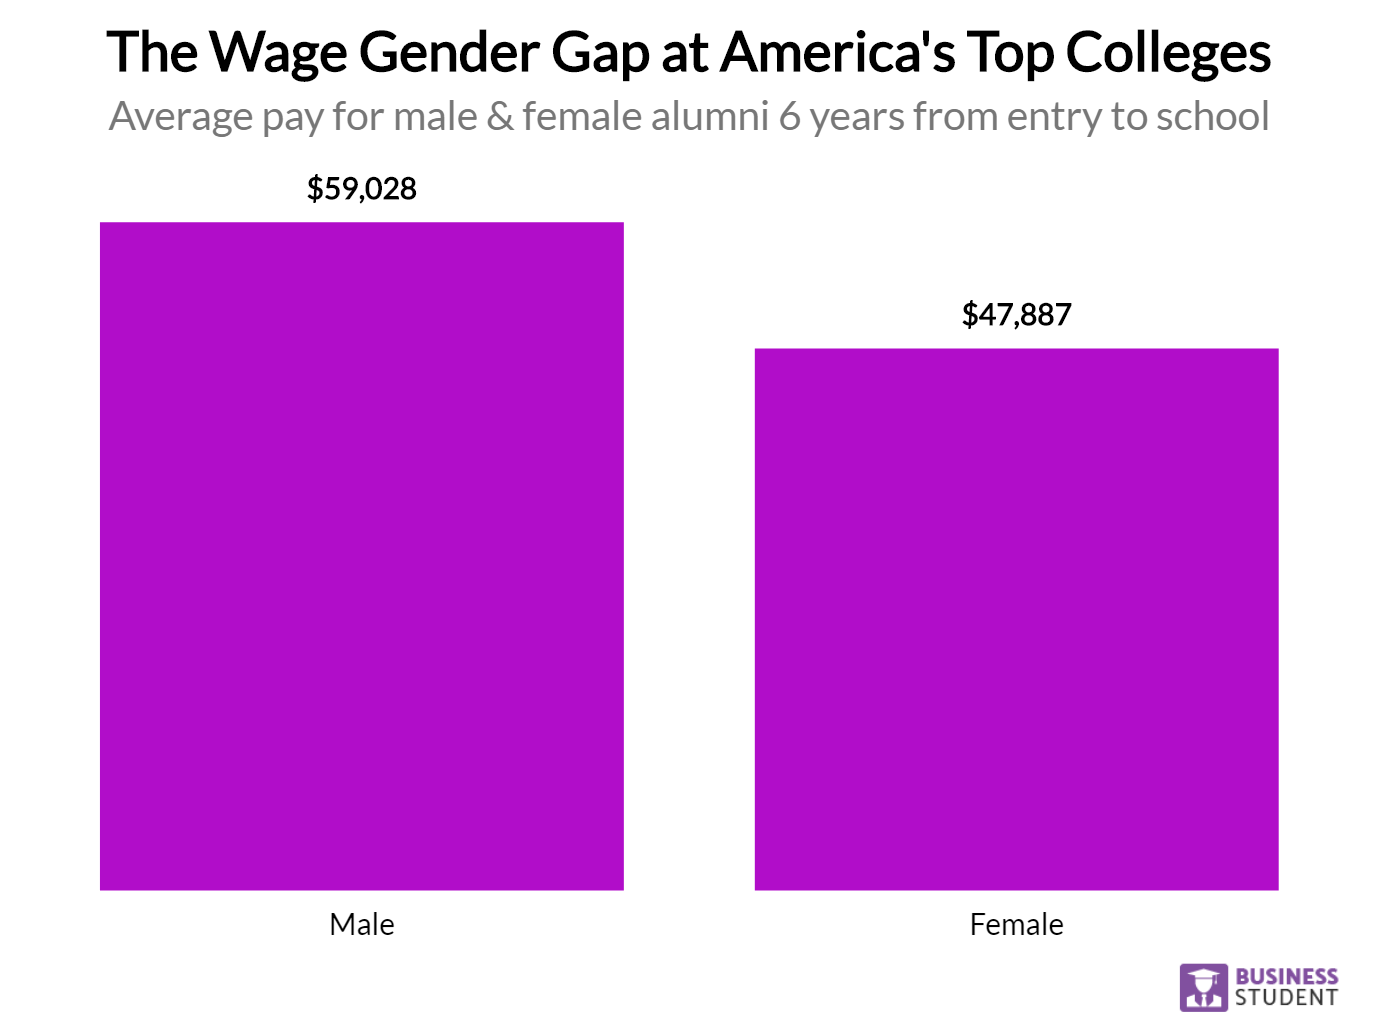 the wage gender gap at americas top colleges 2018 12 04T21 42 03.384Z